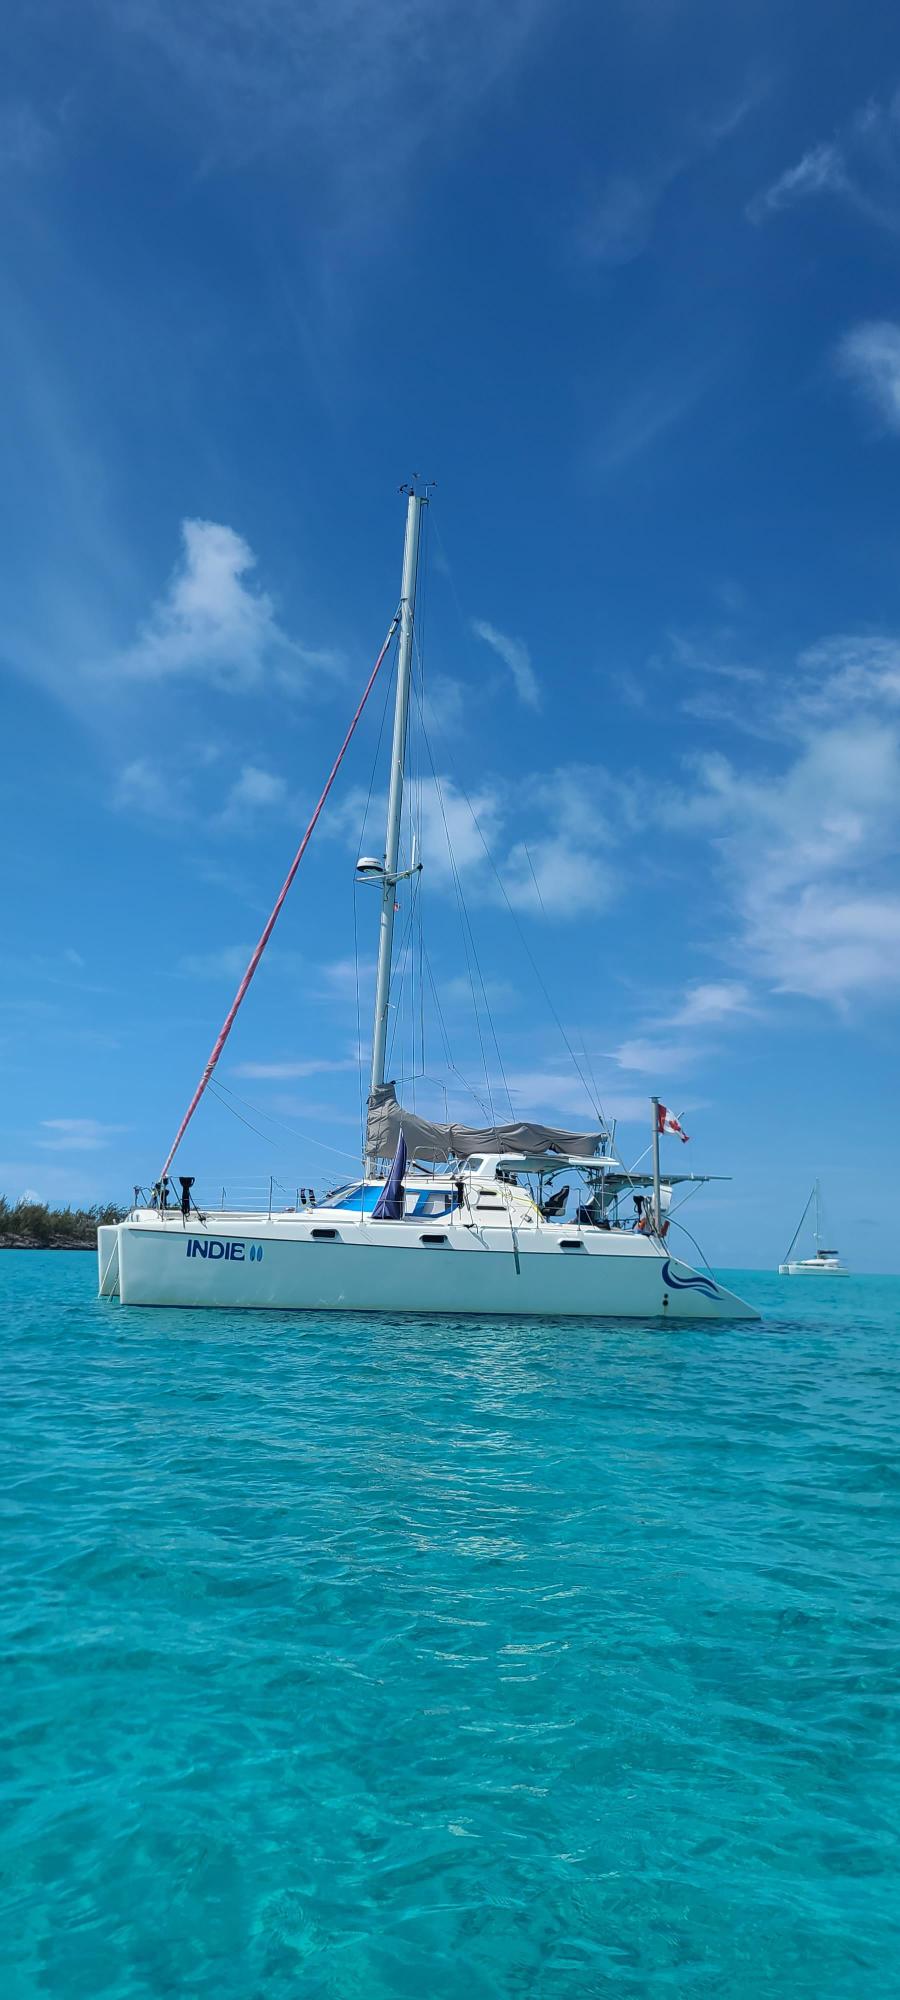 This is sailing vessel Indie II in the Bahamas on the Ocean which was the perfect place to test the Savon De Mer. It worked like a charm! It lathered beautifully when other shampoo's would not!